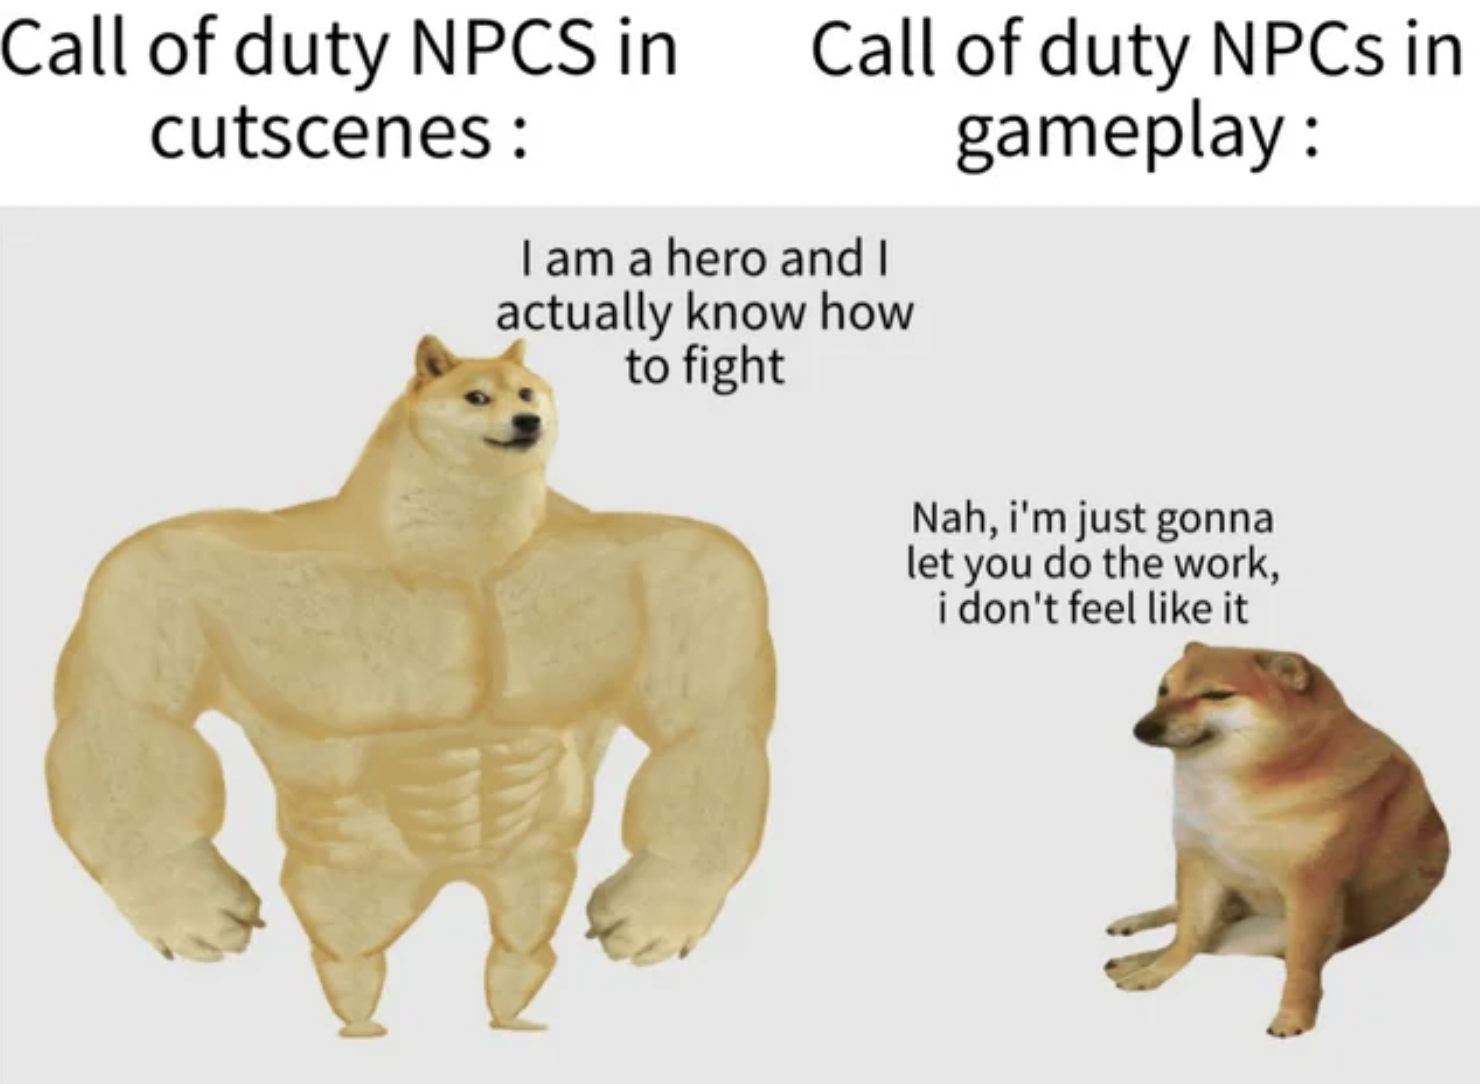 Gaming memes - buff doge - Call of duty Npcs in Call of duty NPCs in cutscenes gameplay I am a hero and I actually know how to fight Nah, i'm just gonna let you do the work, i don't feel it